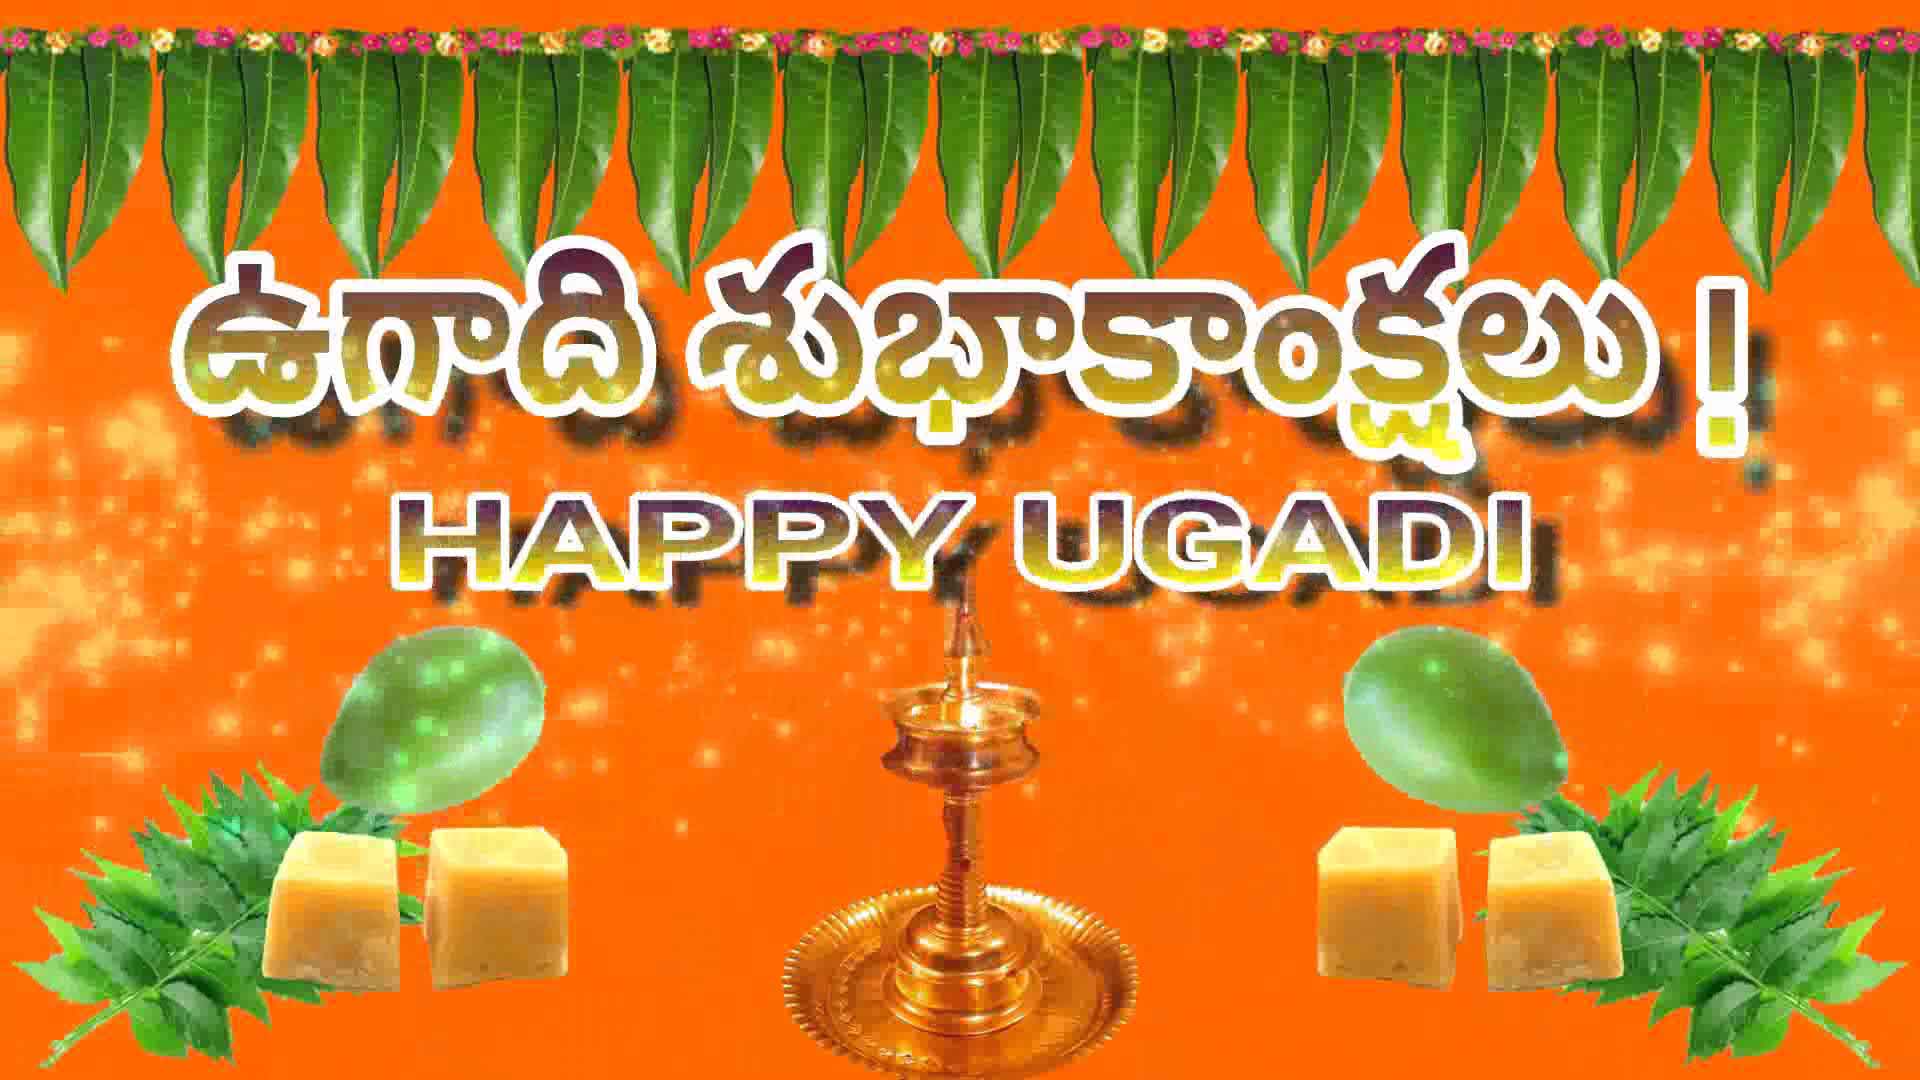 Telugu Ugadi Wallpapers HD - Images, Profile Pics, Photos, Wishes, SMS, Messages, Status for fb, whatsapp